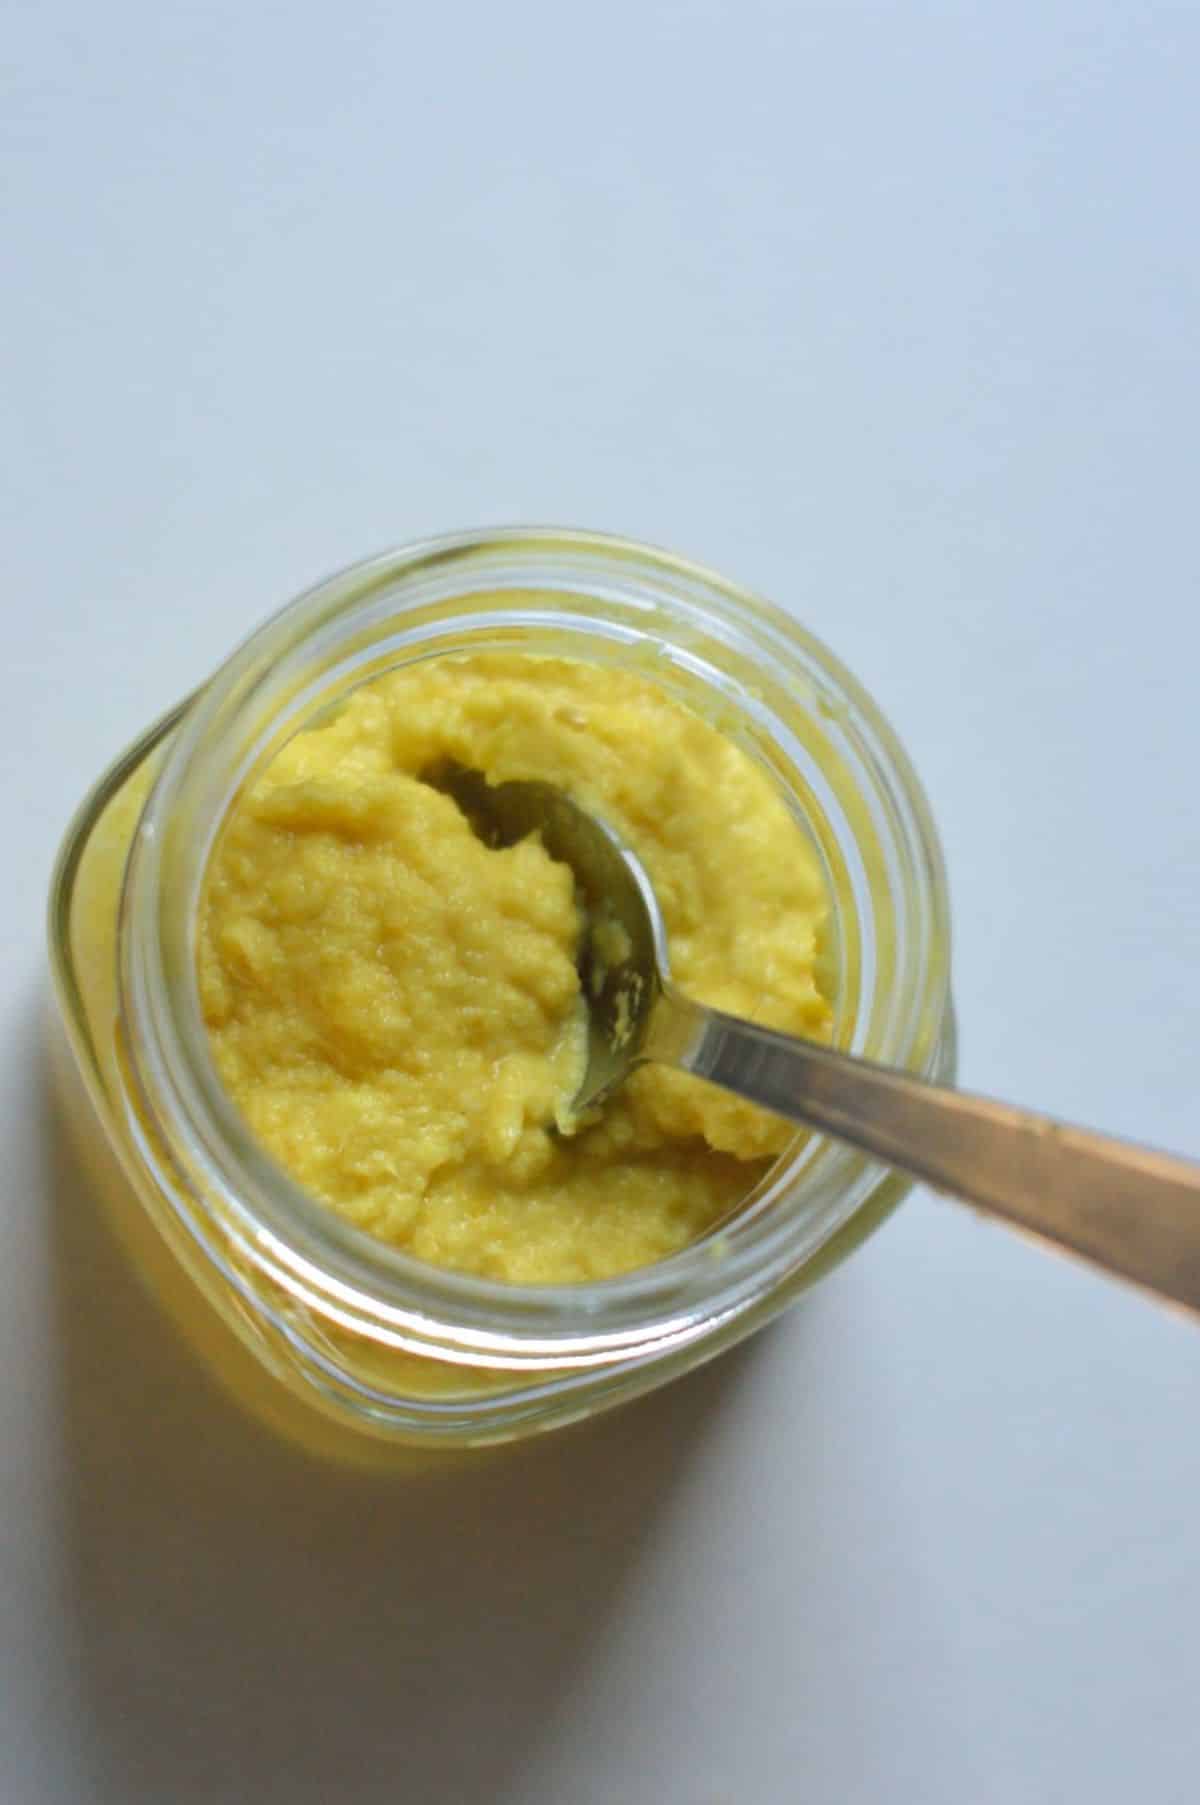 Ginger Garlic Paste in a glass jar with a spoon.